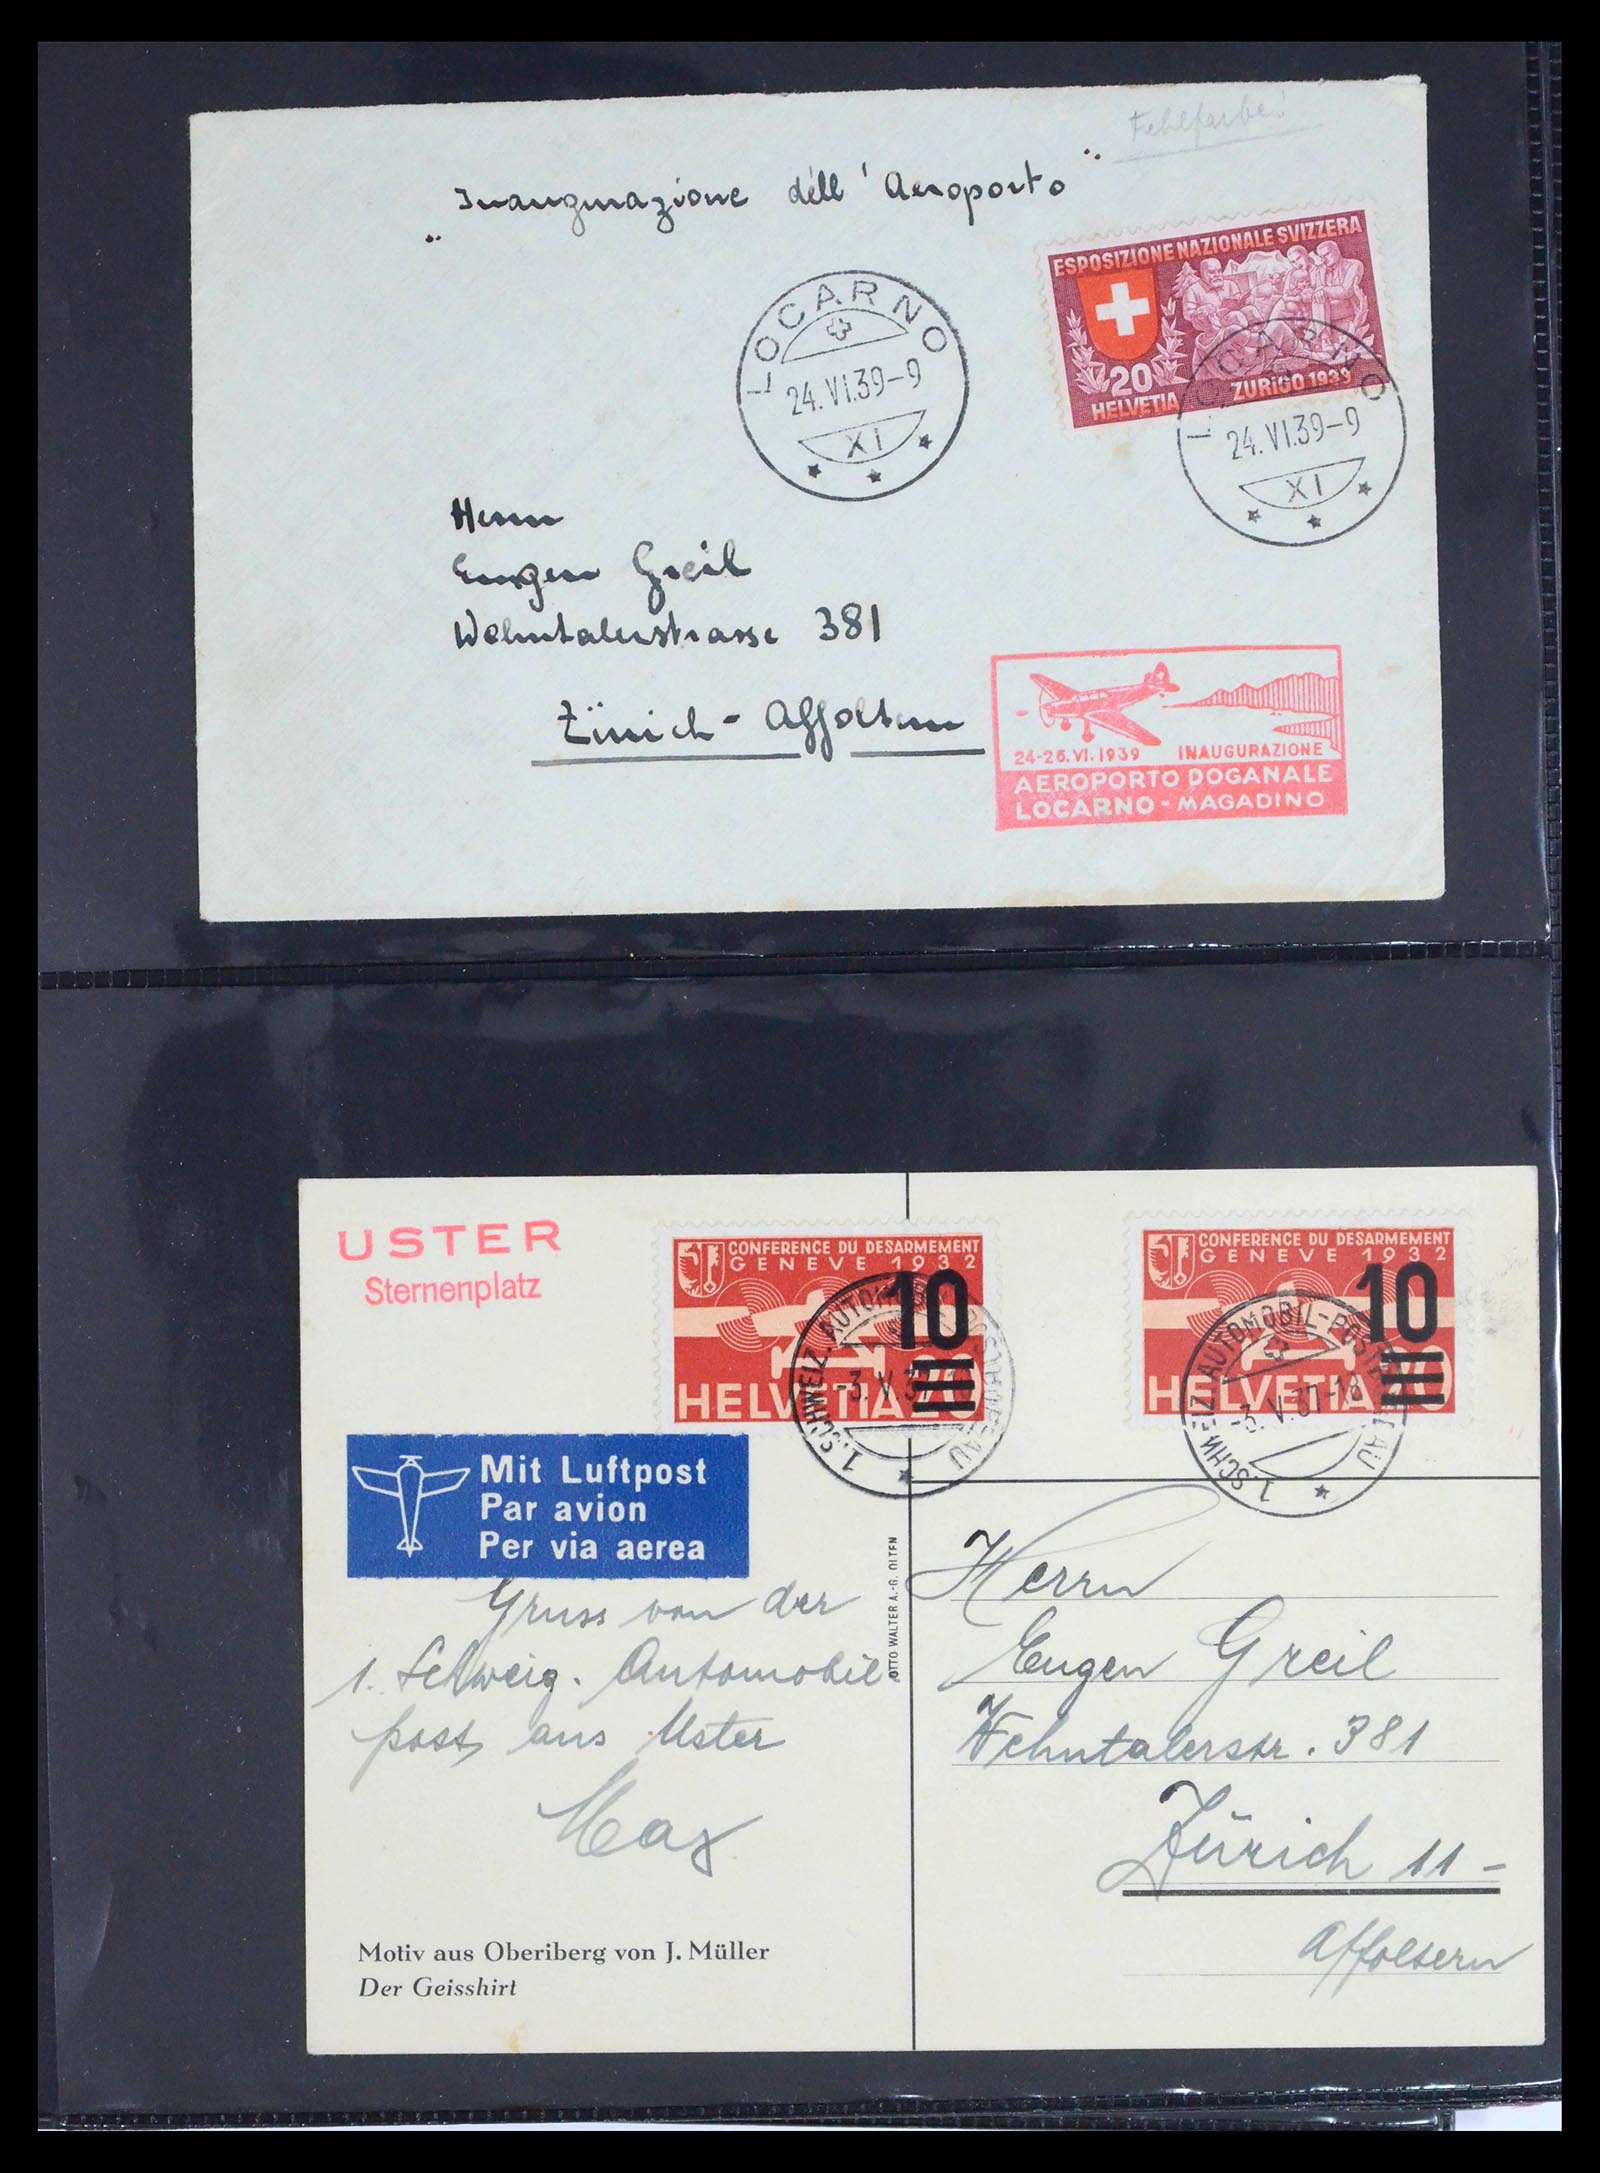 39533 0003 - Stamp collection 39533 Zwitserland airmail covers 1925-1960.